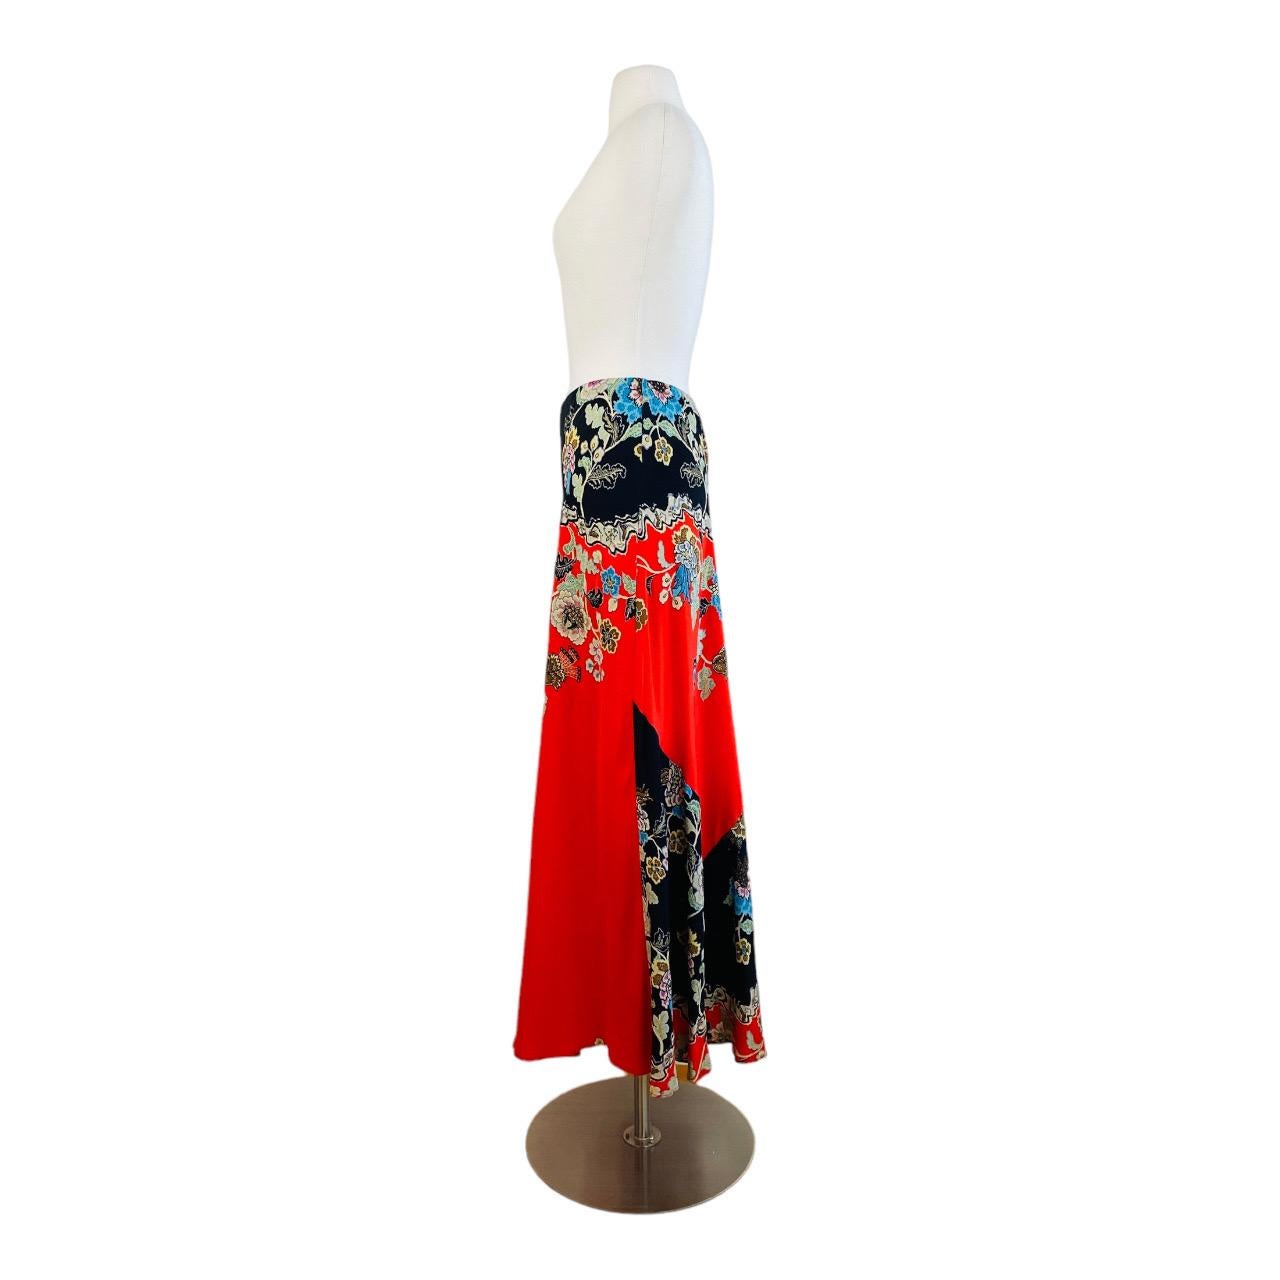 Vintage Roberto Cavalli S/S 2003 Chinoiserie Black + Red Floral Maxi Skirt For Sale 1